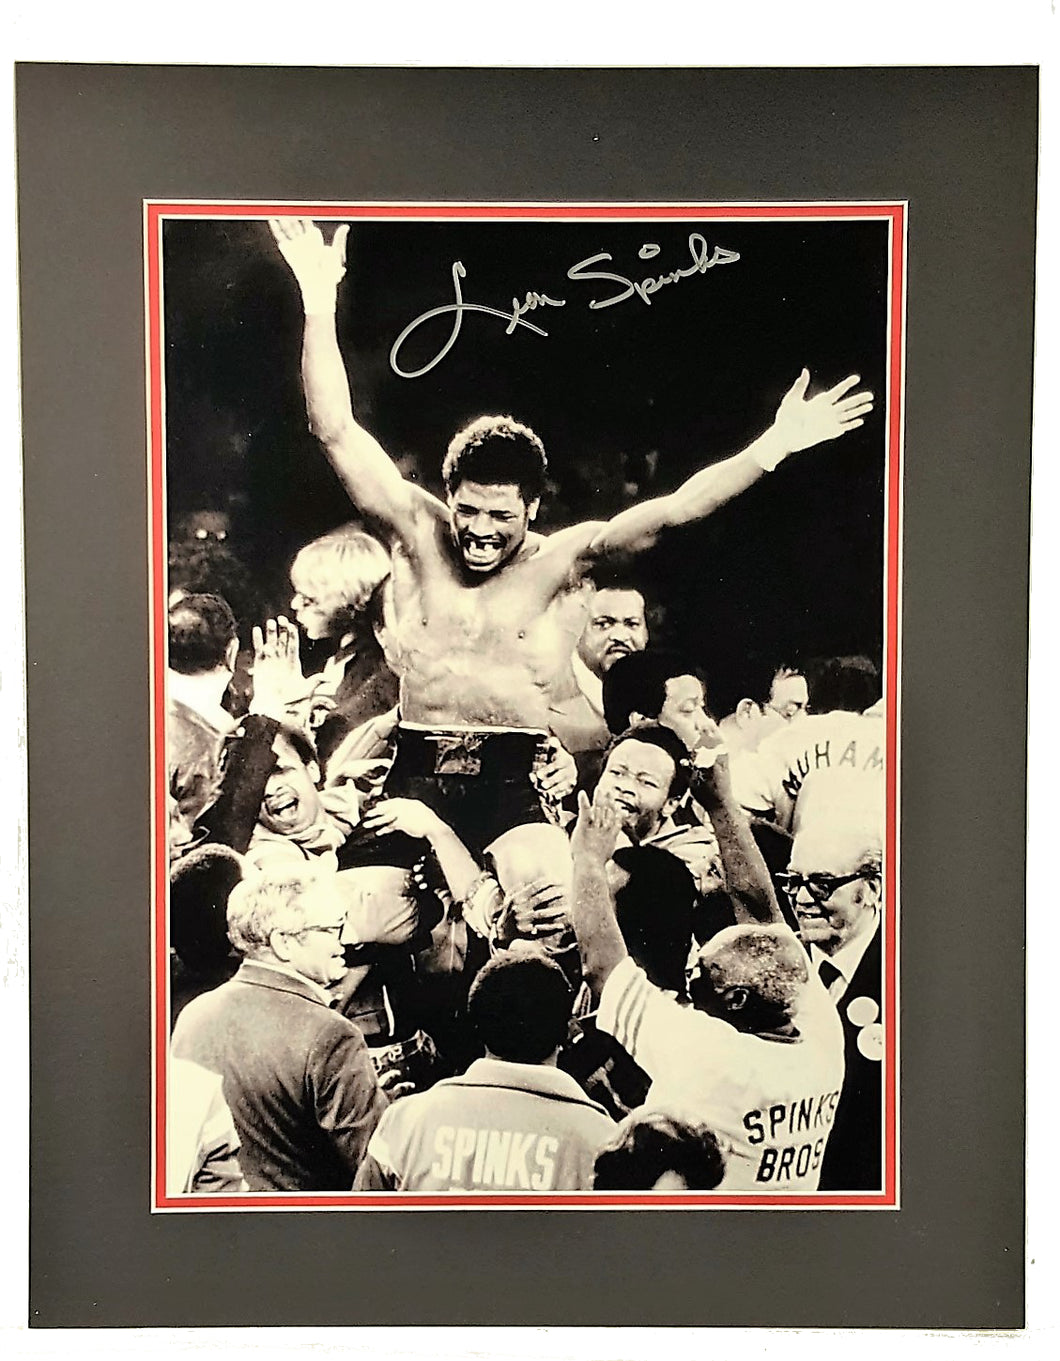 Leon Spinks Signed Autographed 16x20 Matted